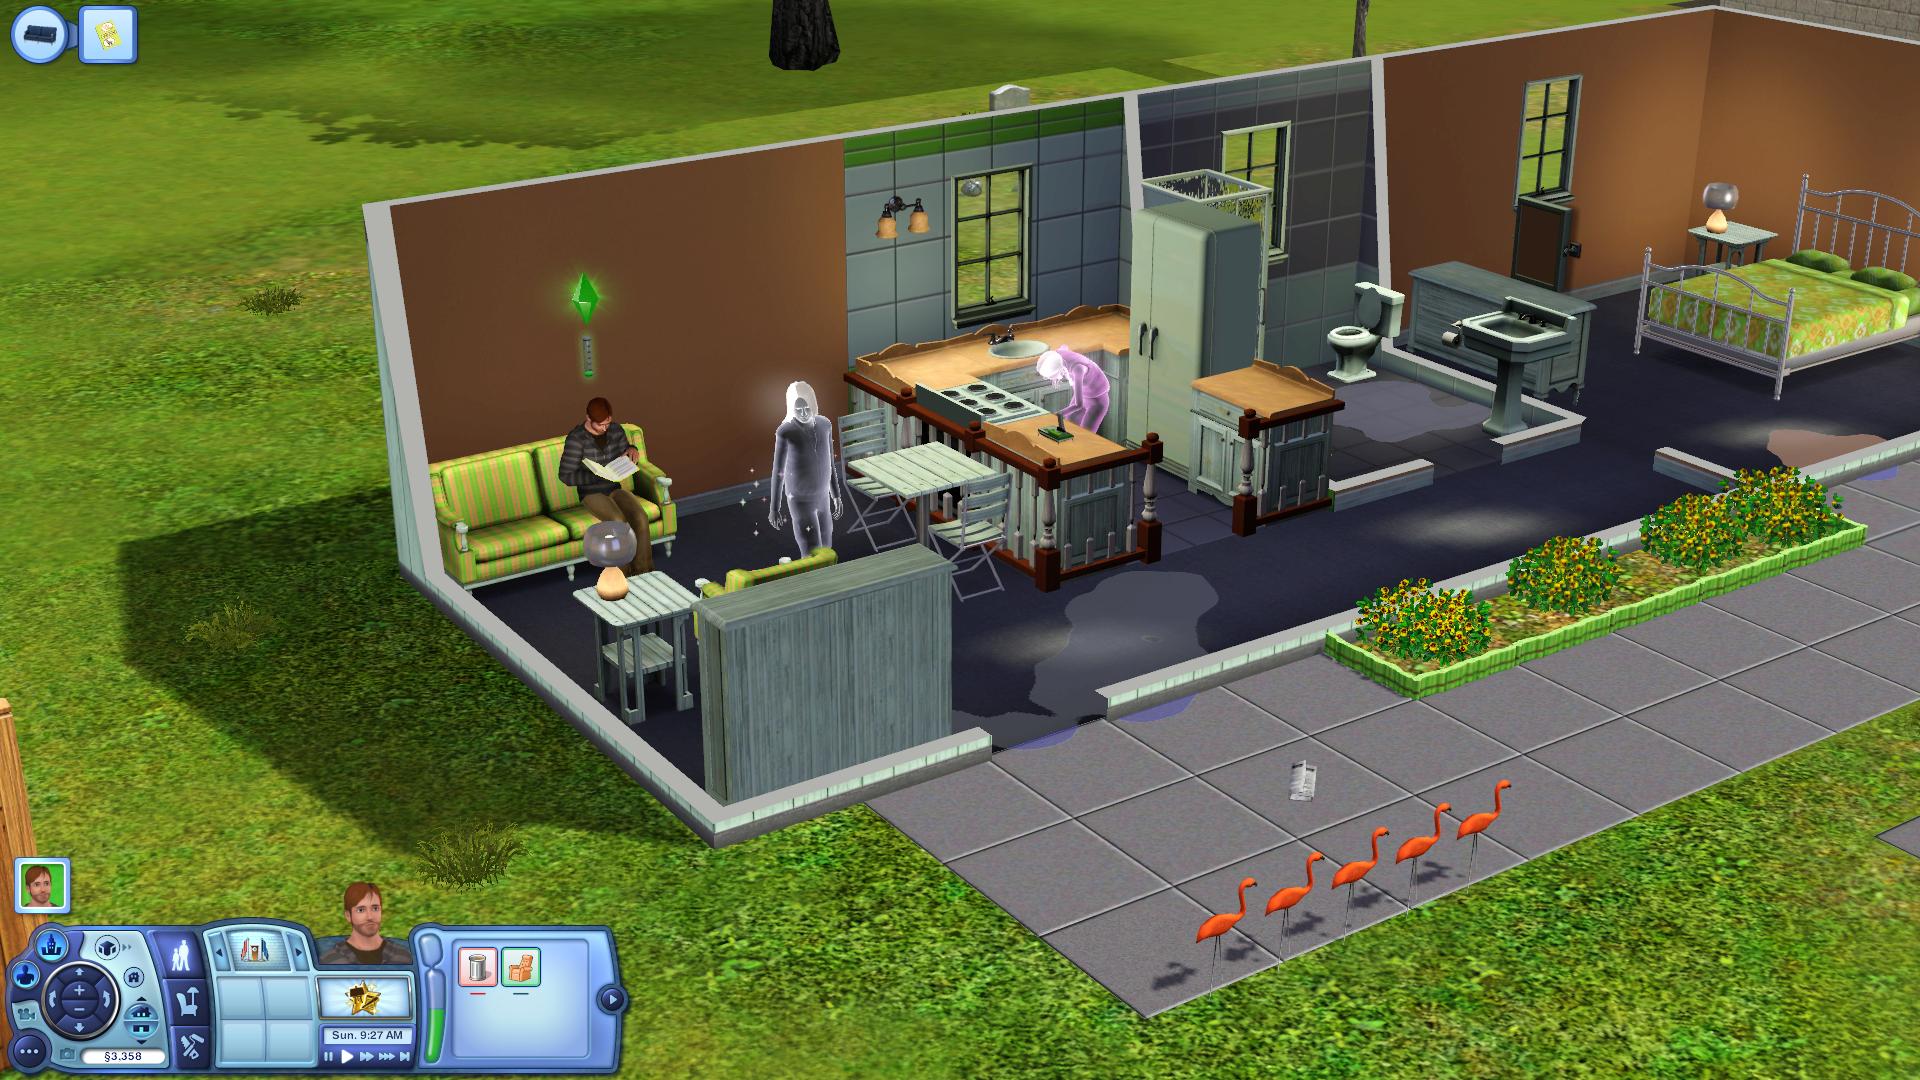 sims 3 free download full version pc